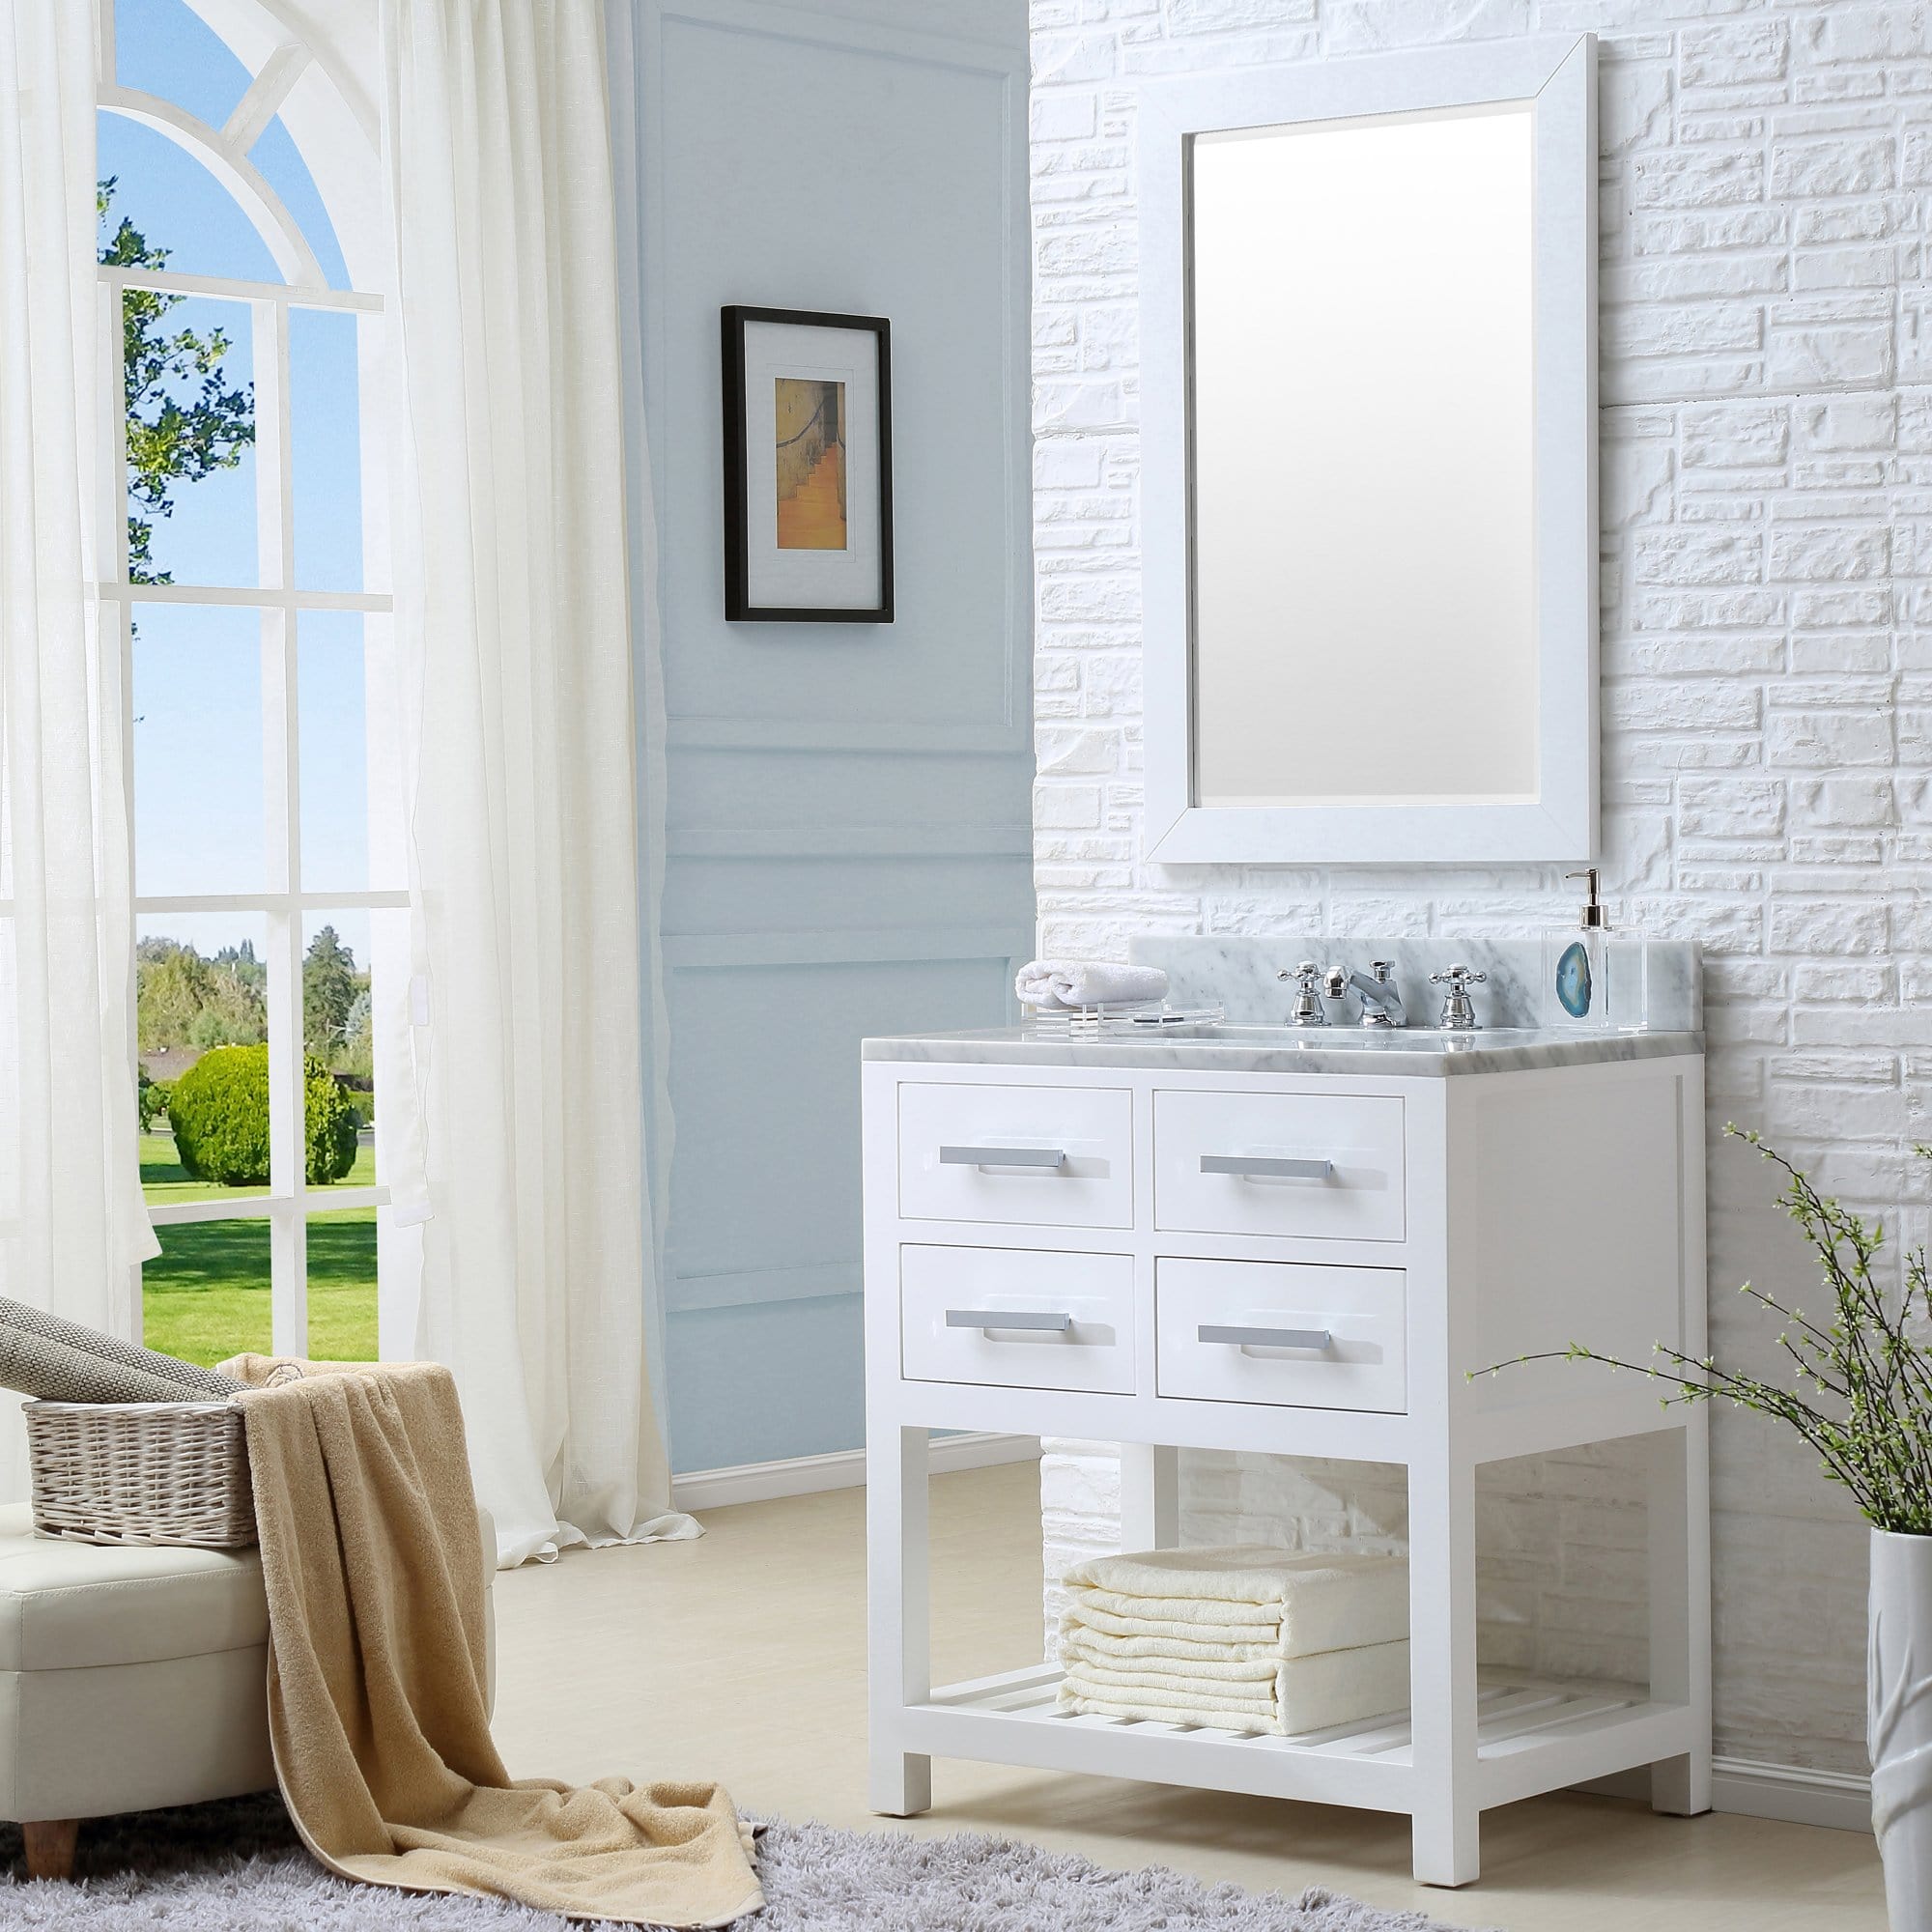 Water Creation 30 Inch Pure White Single Sink Bathroom Vanity With Faucet From The Madalyn Collection - Molaix700621683575Bathroom vanityMA30CW01PW-000BX0901